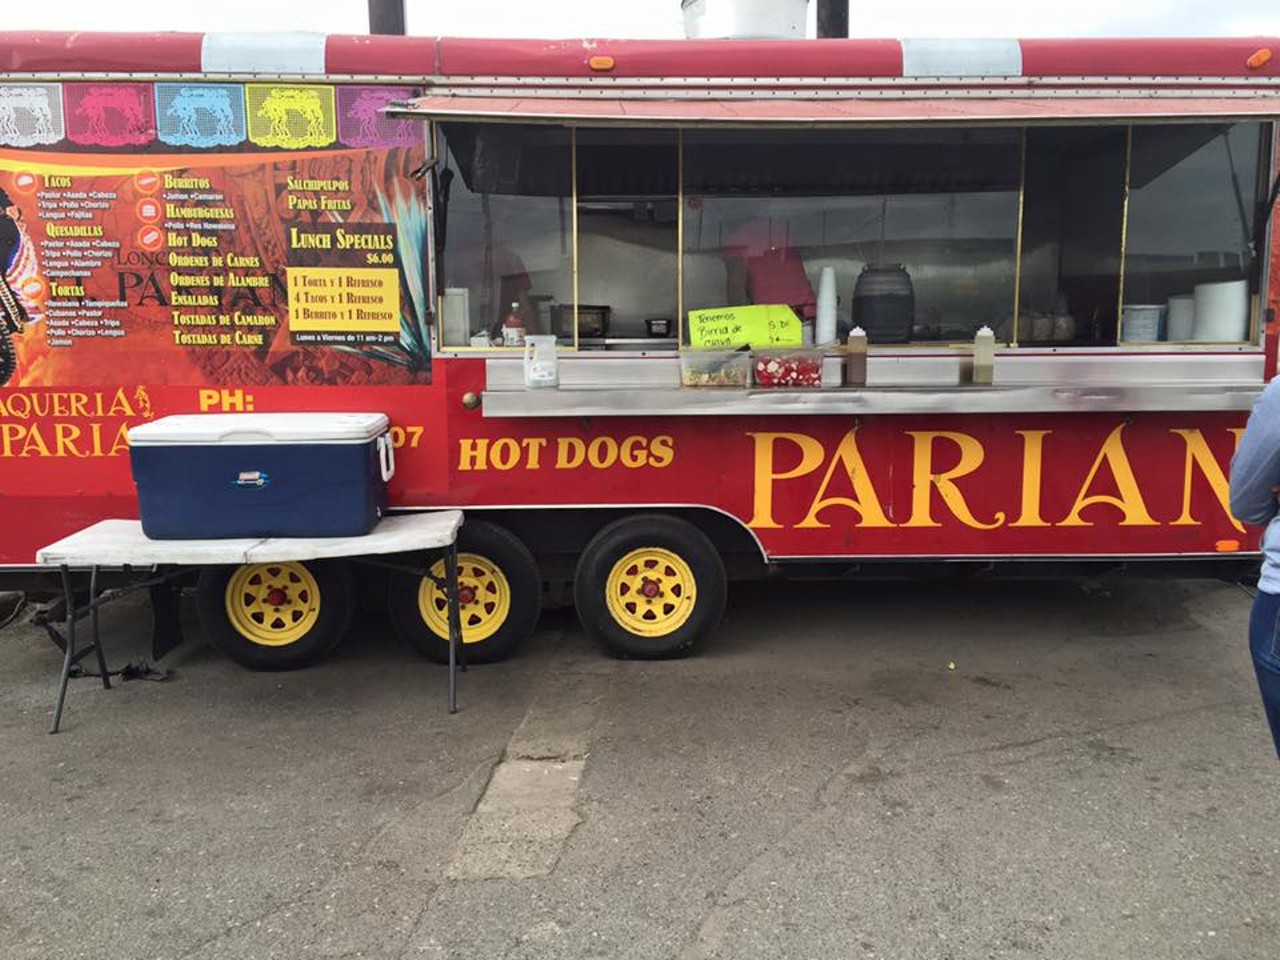 El Parian
Chorizo taco with pickled onion and jalape&ntilde;o garnish? Get your ass to this food truck now! (Photo via Facebook user Reggie Williams)